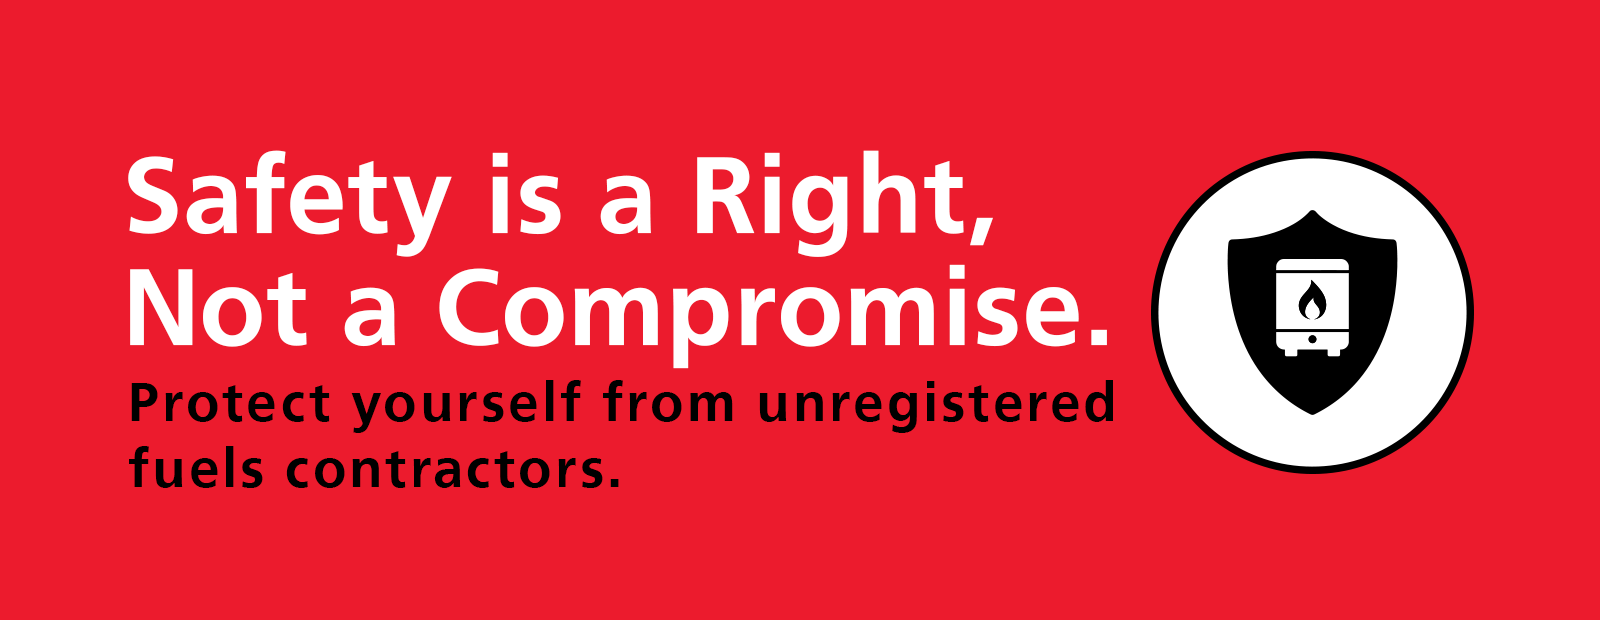 Safety is a Right, Not a Compromise